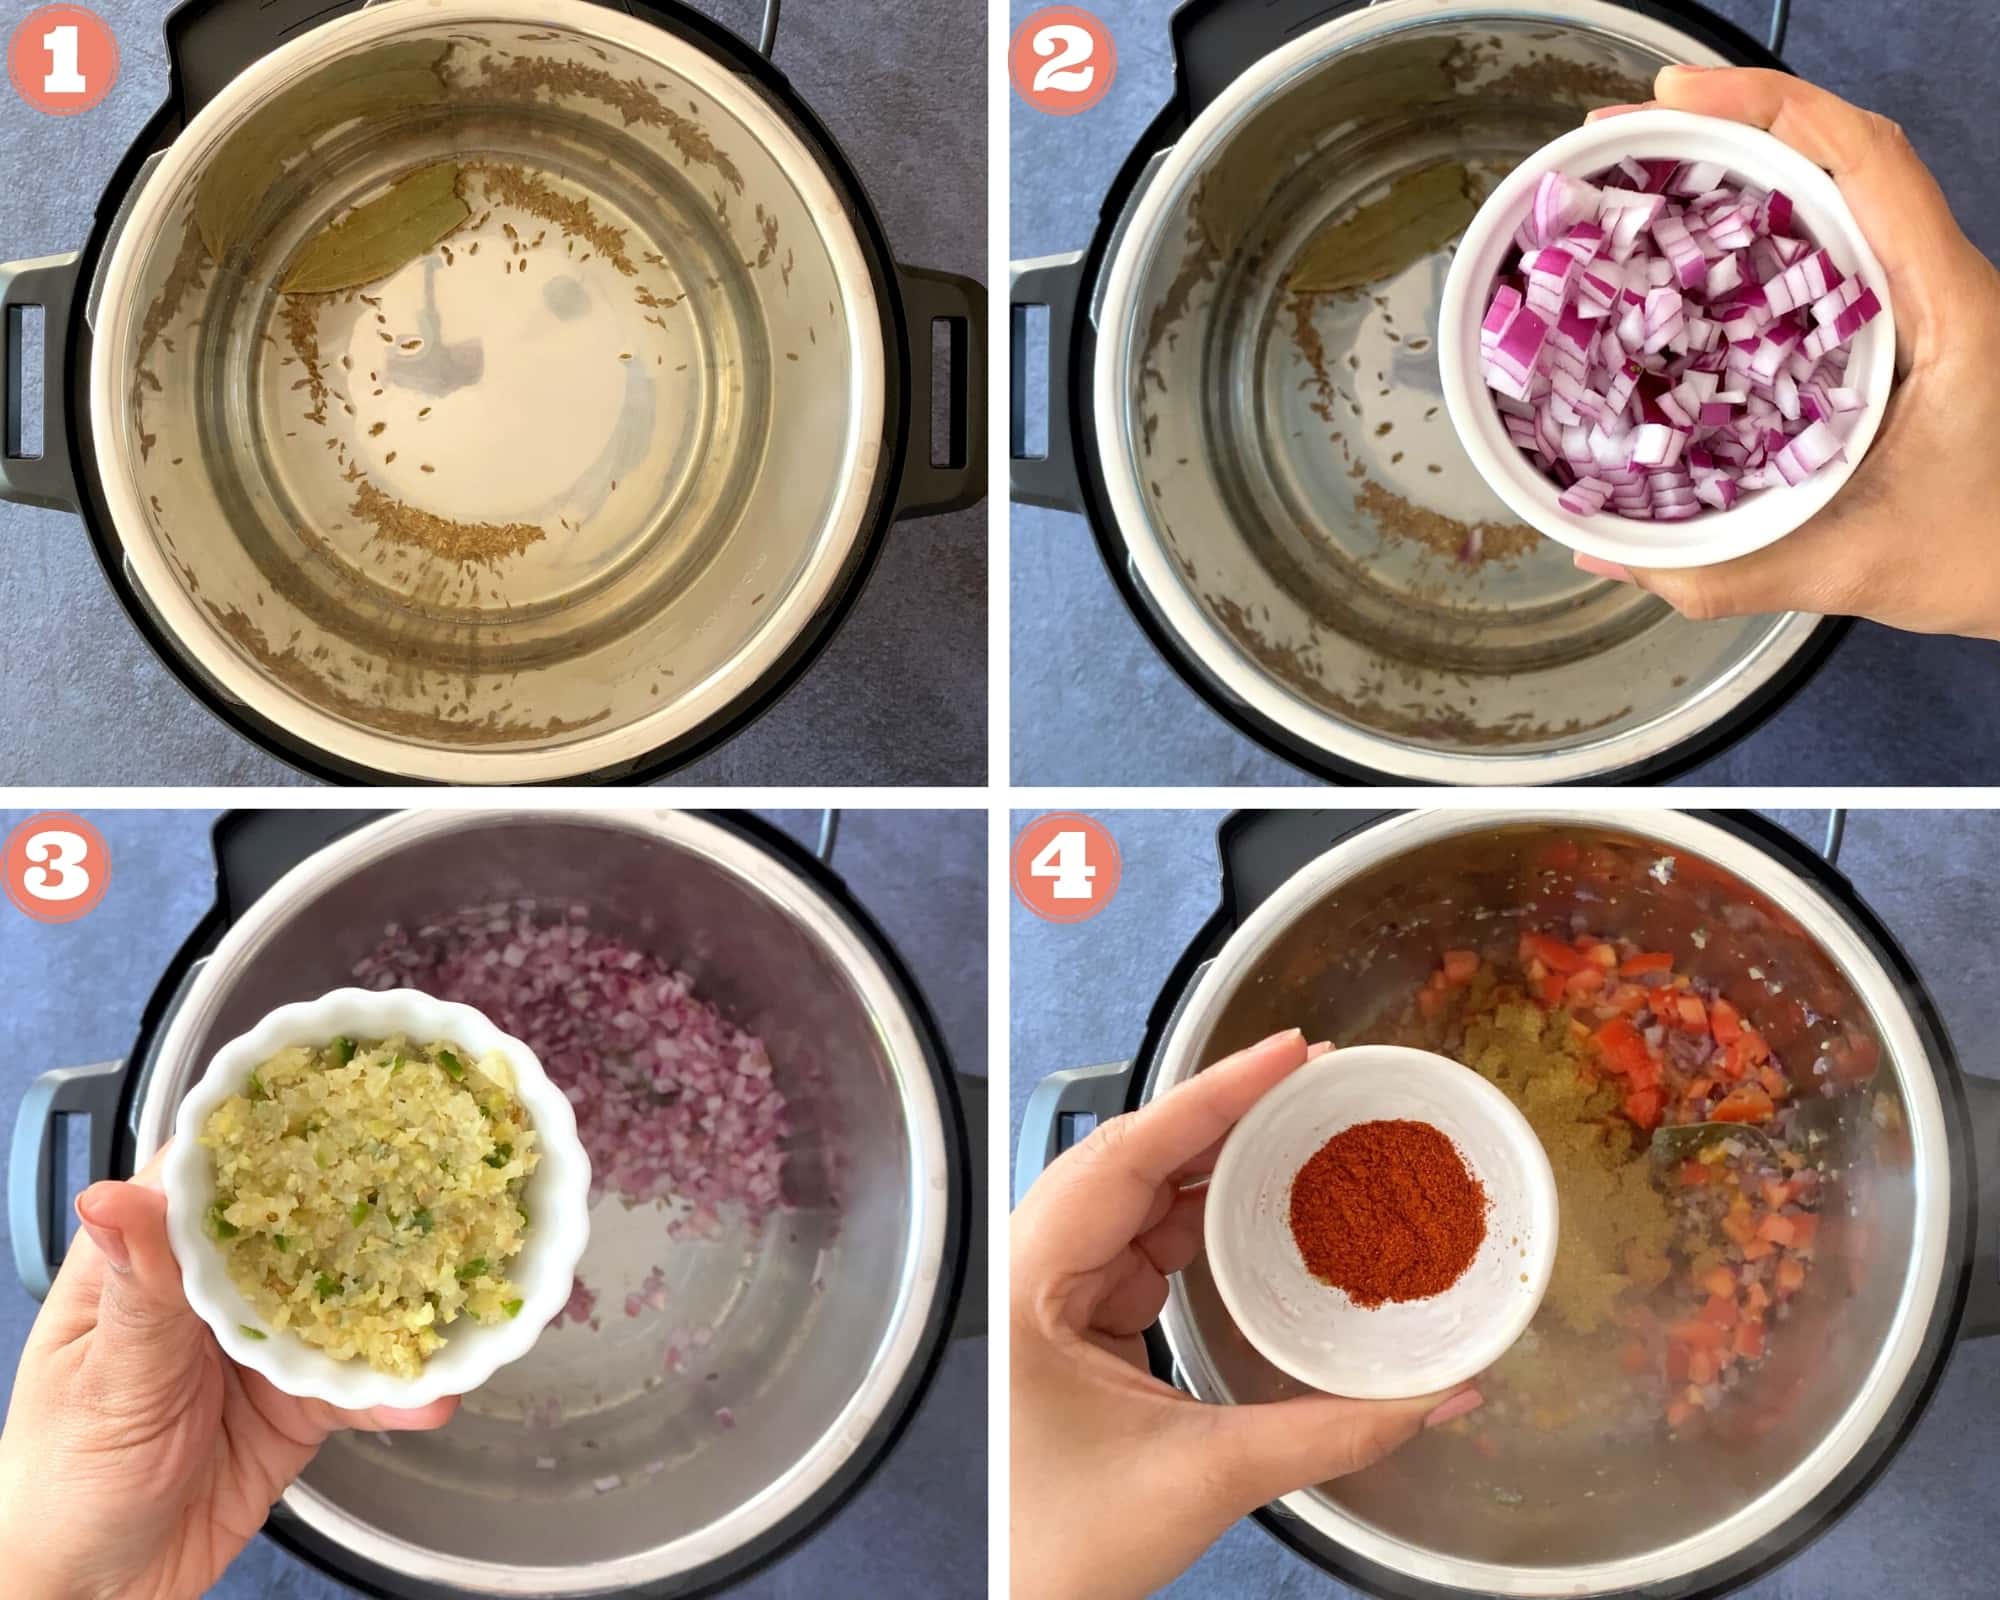 sauteing cumin seeds and bay leaf in instant pot, small bowl of chopped red onions, small bowl of minced garlic, ginger, chile, adding Indian spices to instant pot